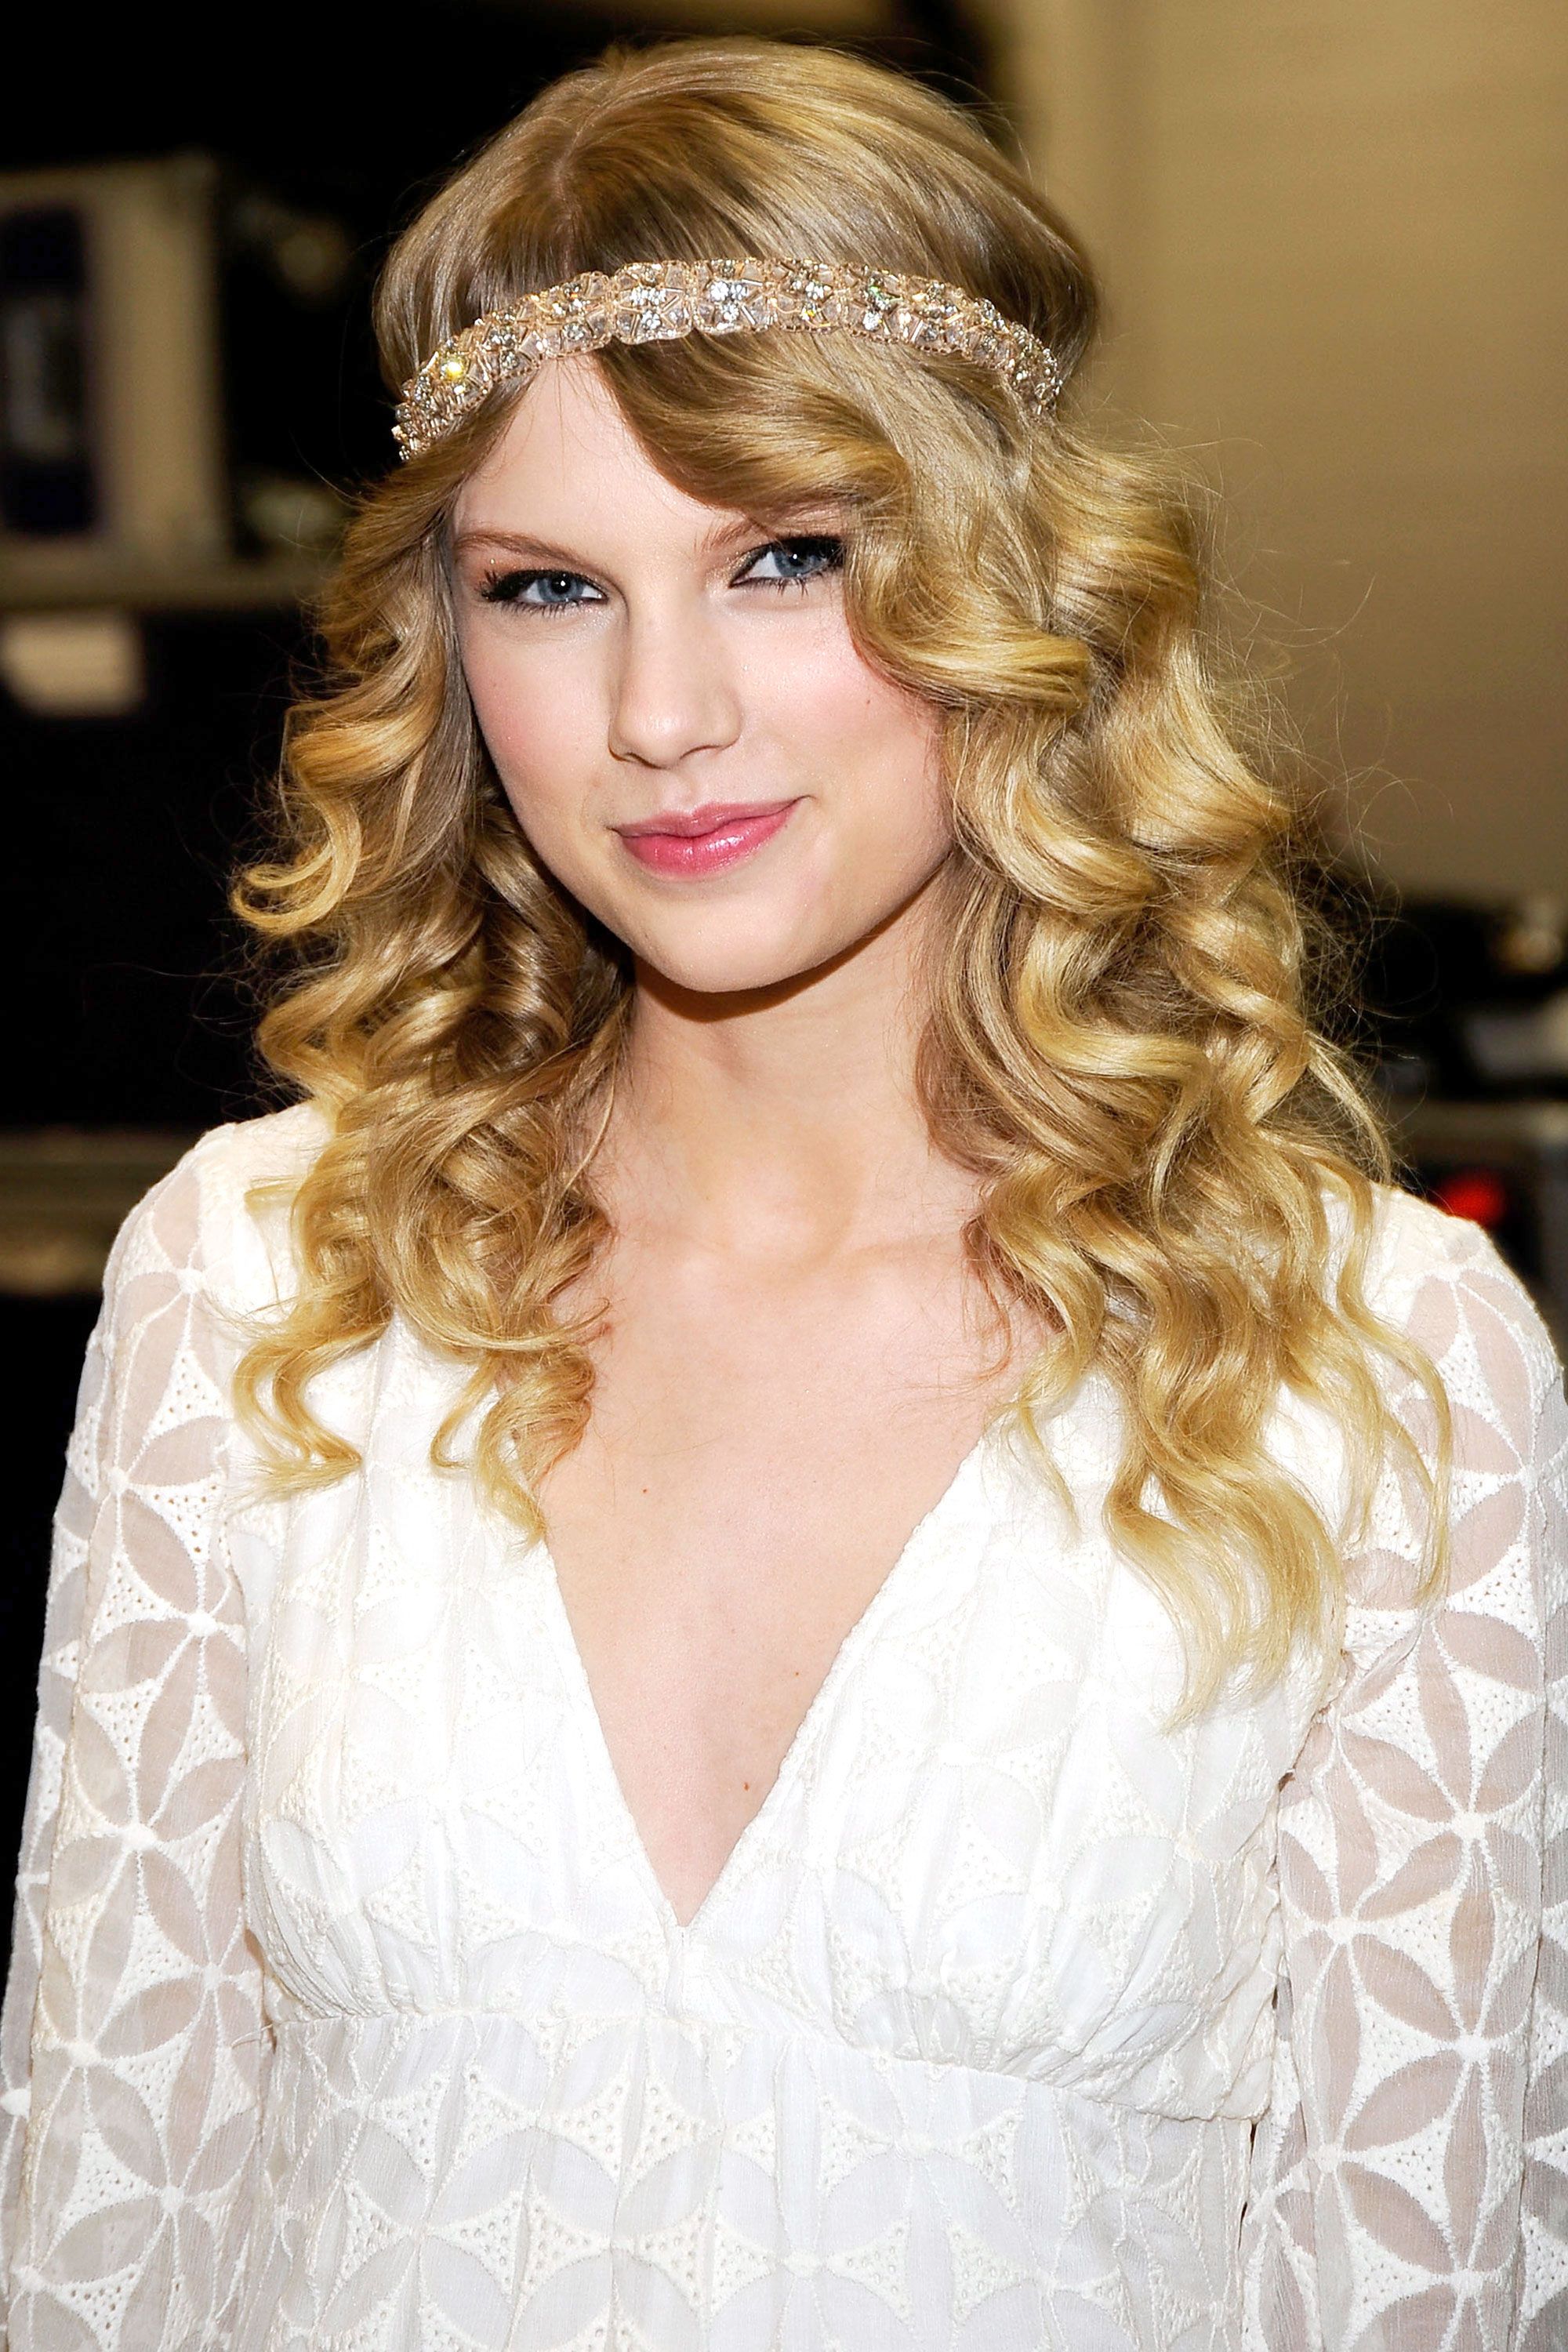 Taylor Swift Hot Porn Shemale - Taylor Swift Hairstyles - Taylor Swift's Curly, Straight, Short, Long Hair